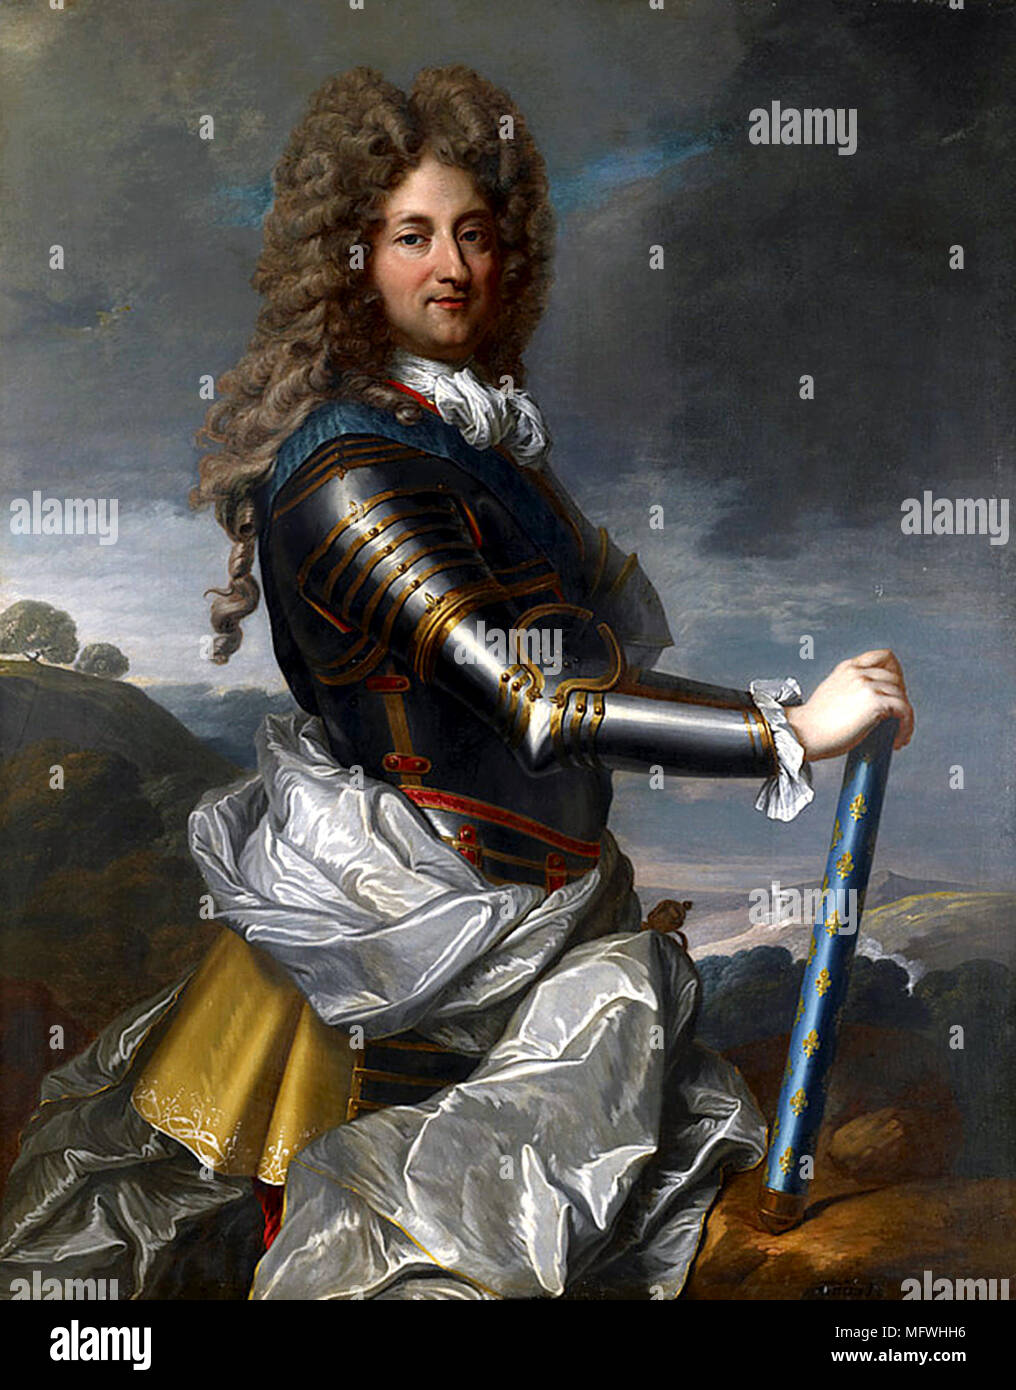 Philippe II, Duke of Orléans (1674 – 1723), member of the royal family of France and served as Regent of the Kingdom from 1715 to 1723. Portrait by Jean-Baptiste Santerre Stock Photo